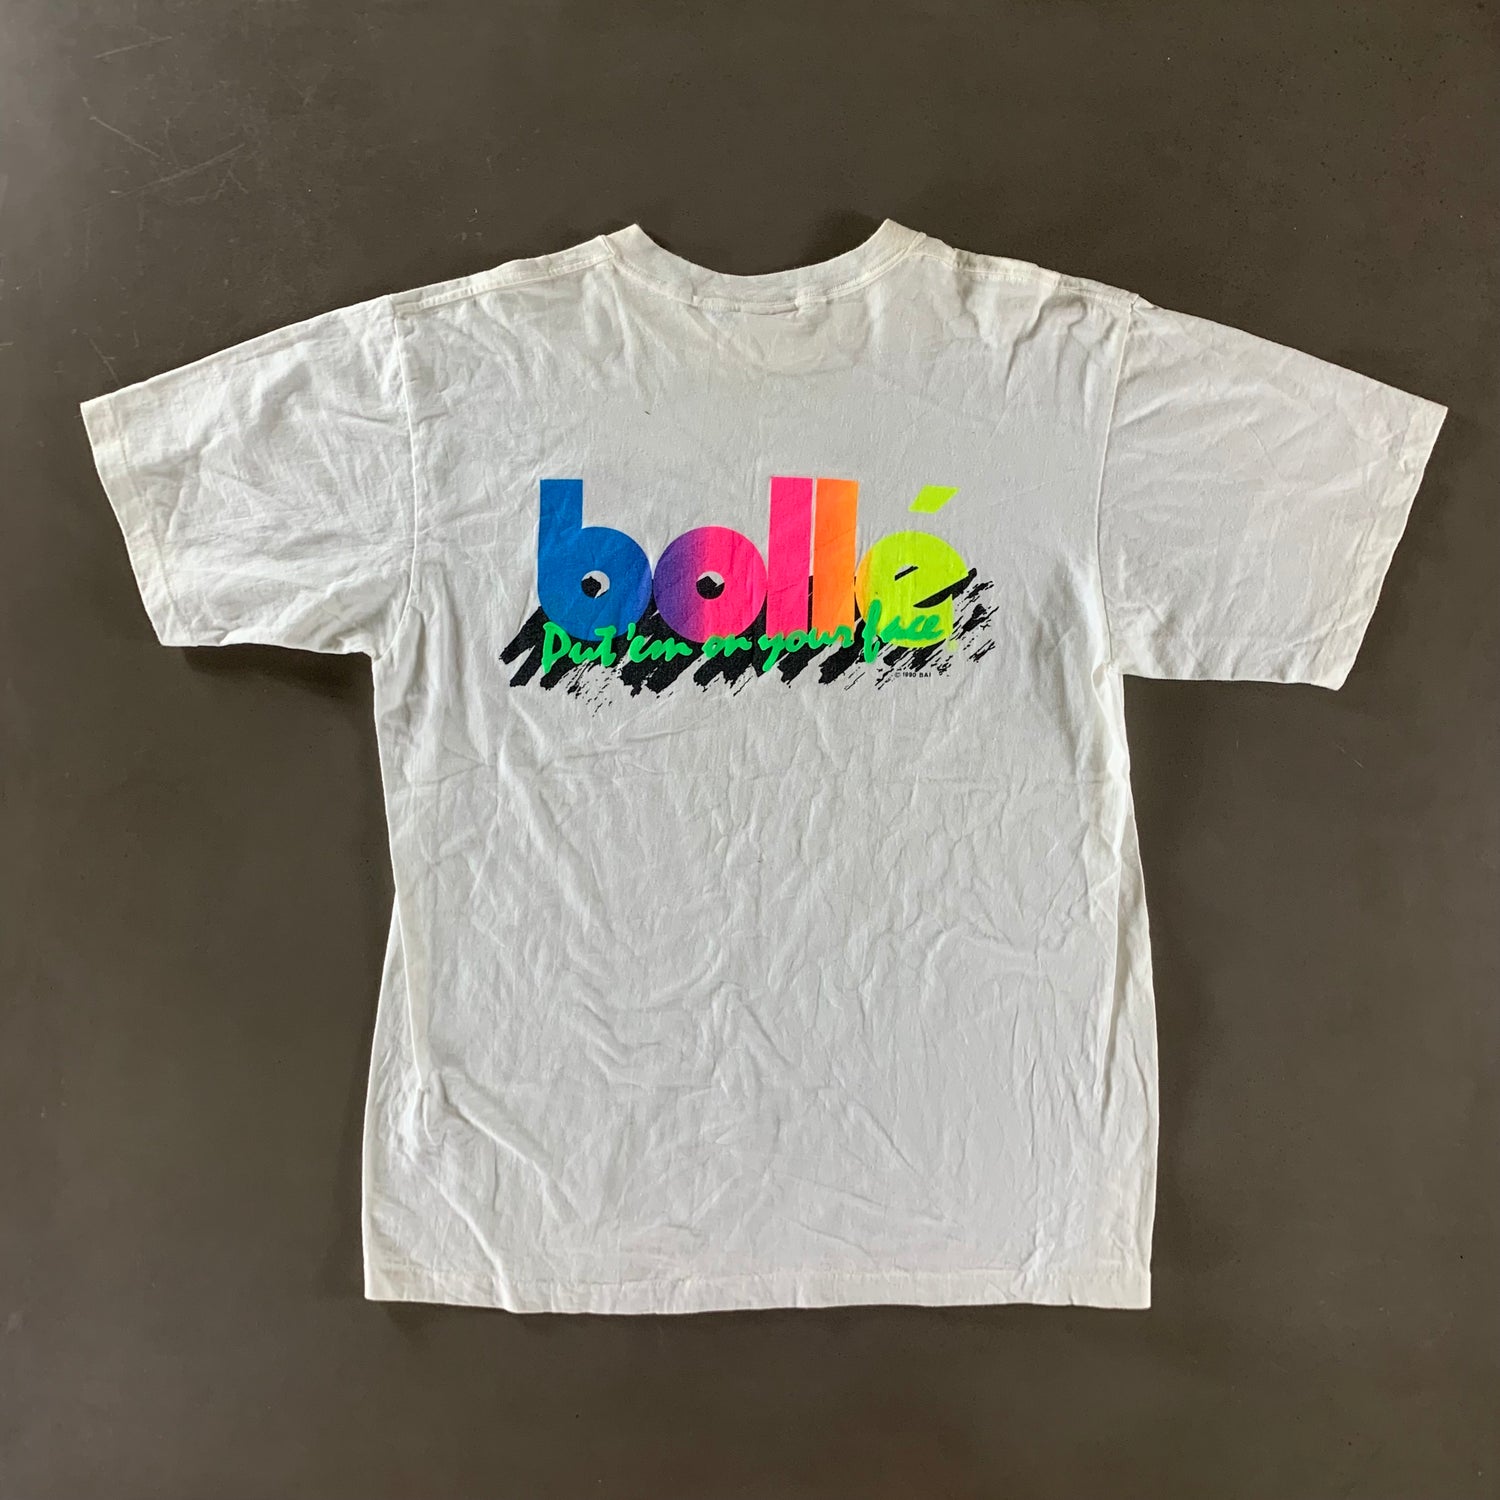 Vintage 1990s Bolle T-shirt size XL